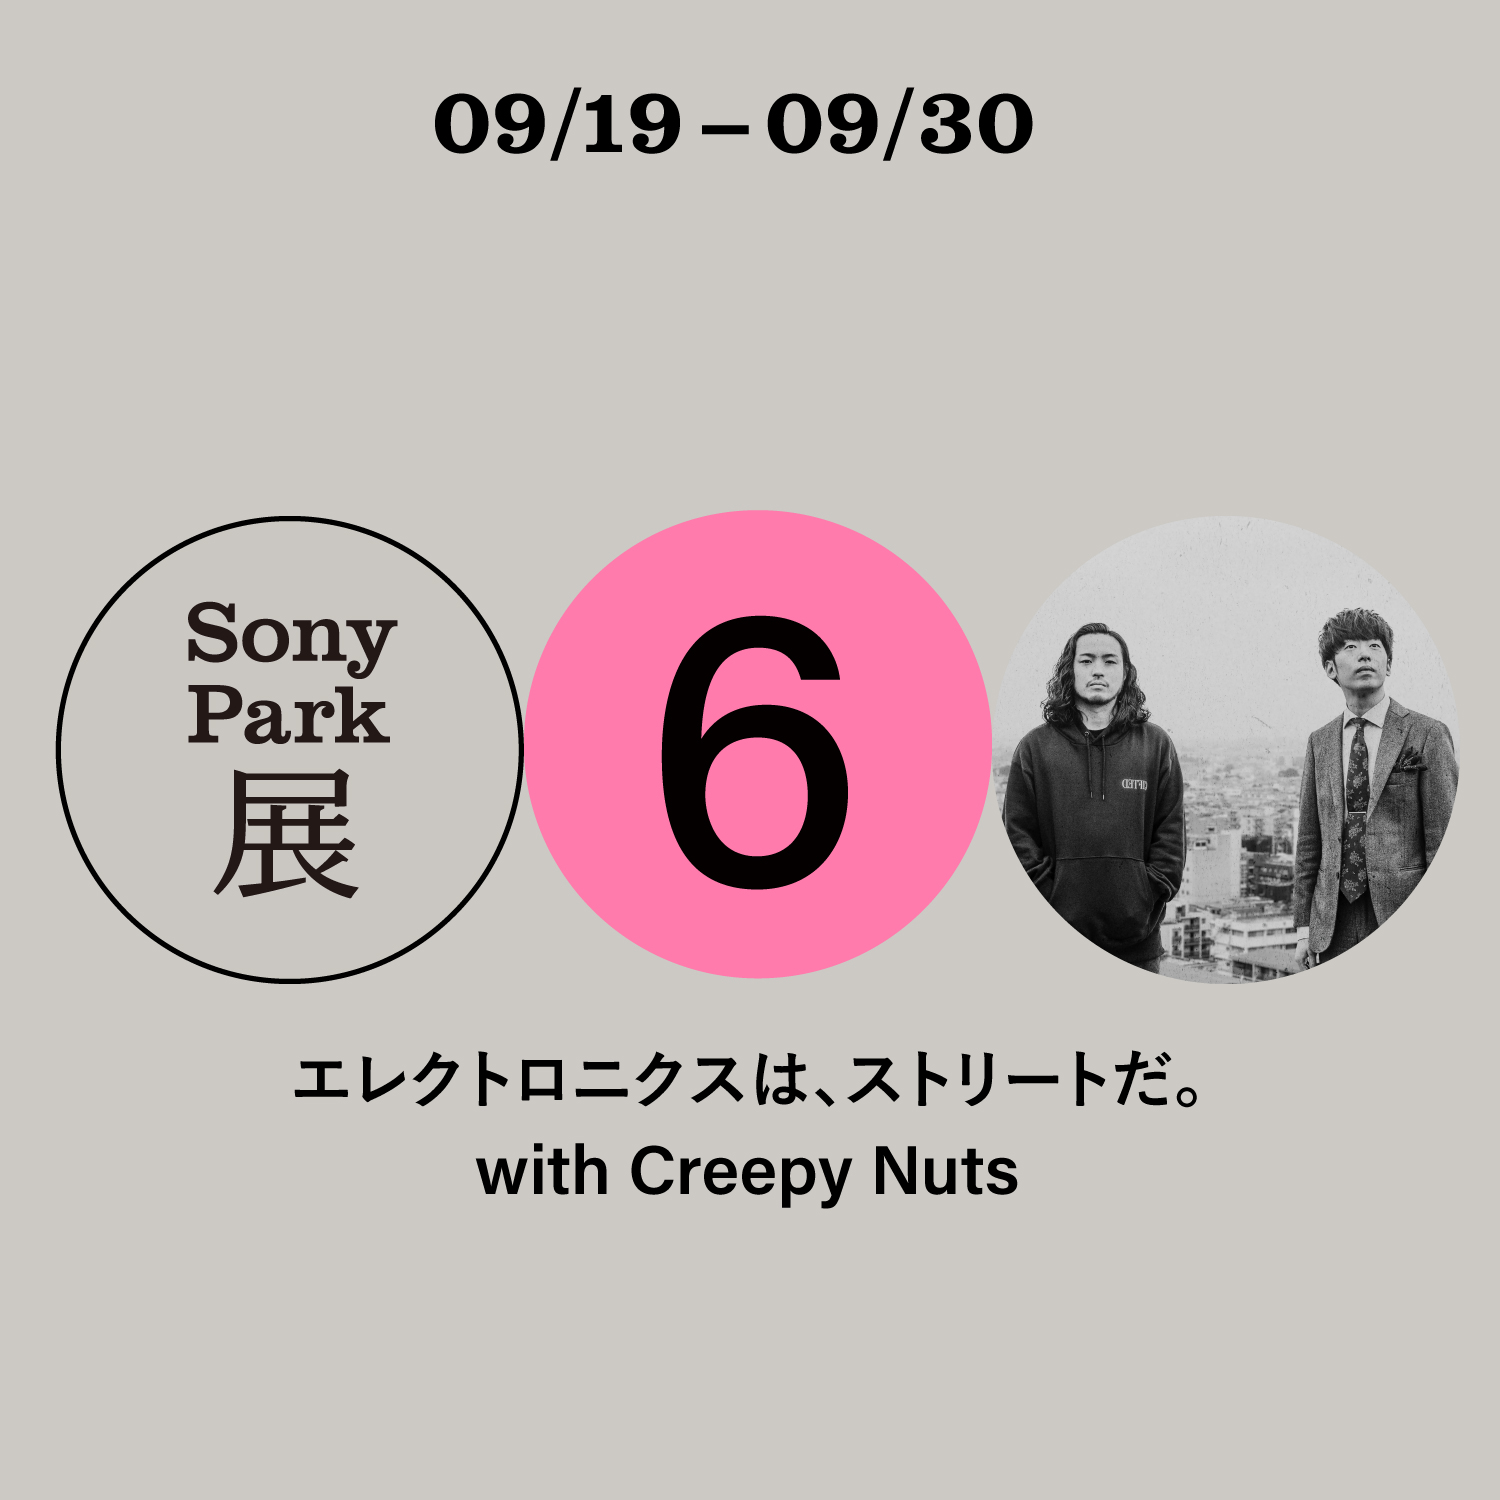 Sony Park Exhibition ⑥ELECTRONICS with Creepy Nuts